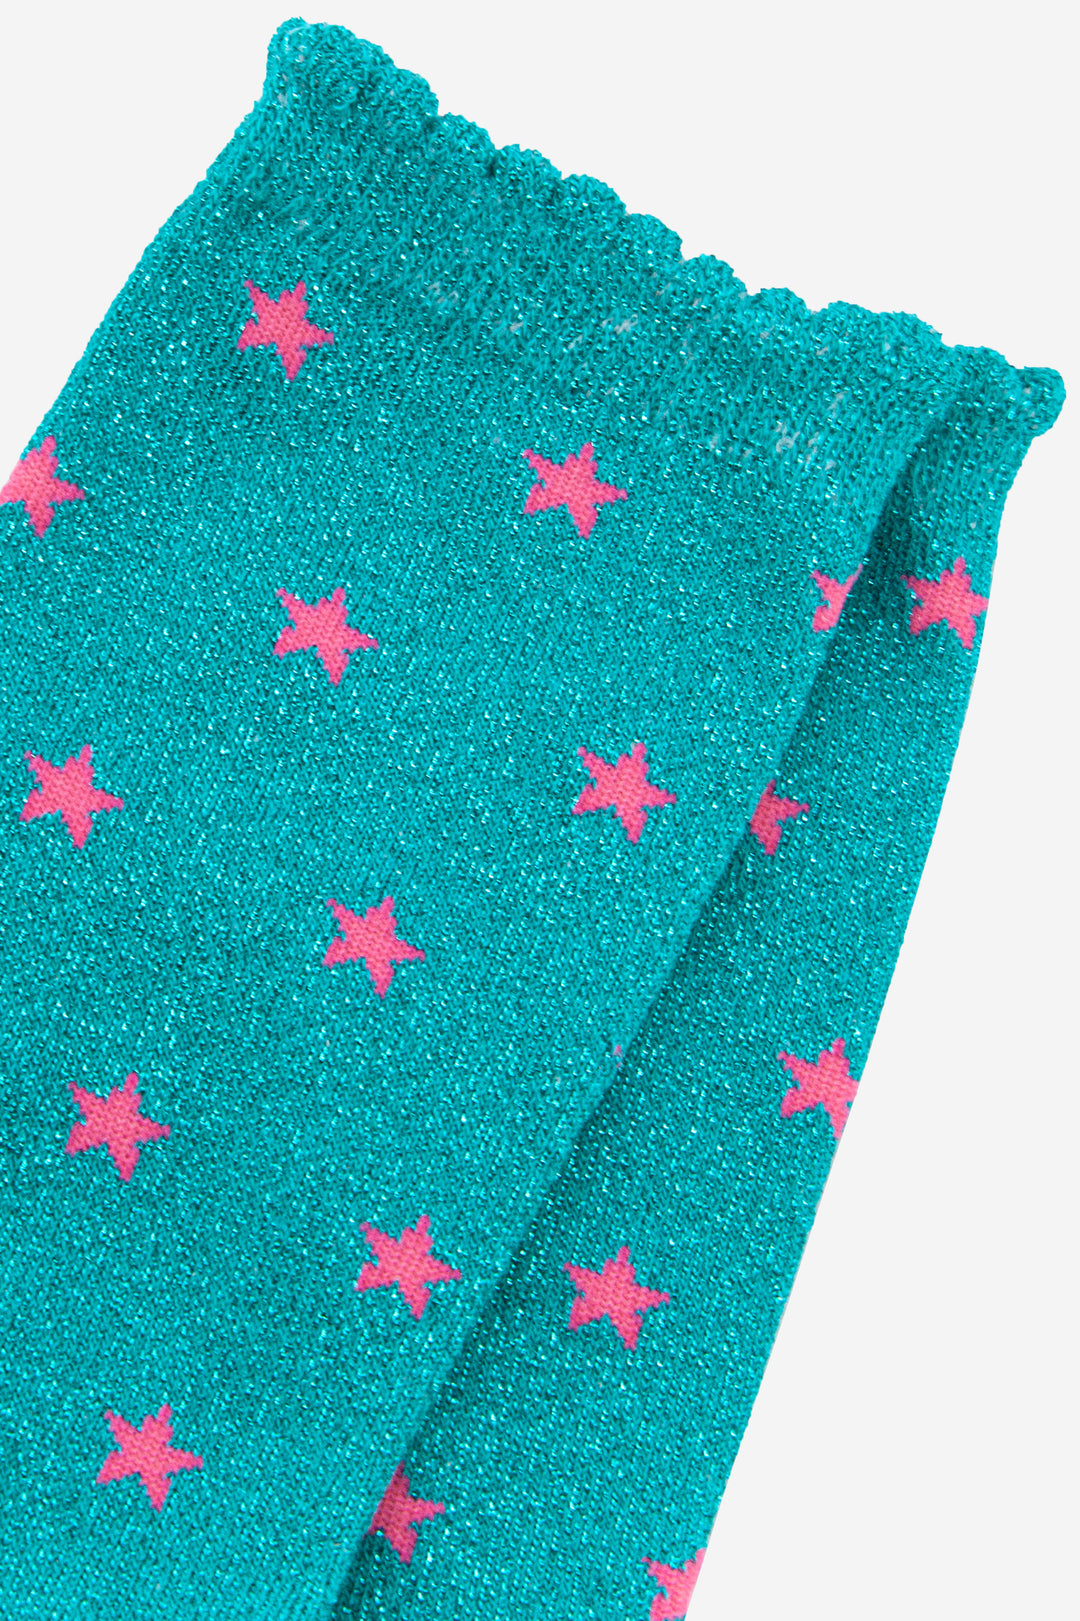 close up of the pink star pattern on the blue glitter socks